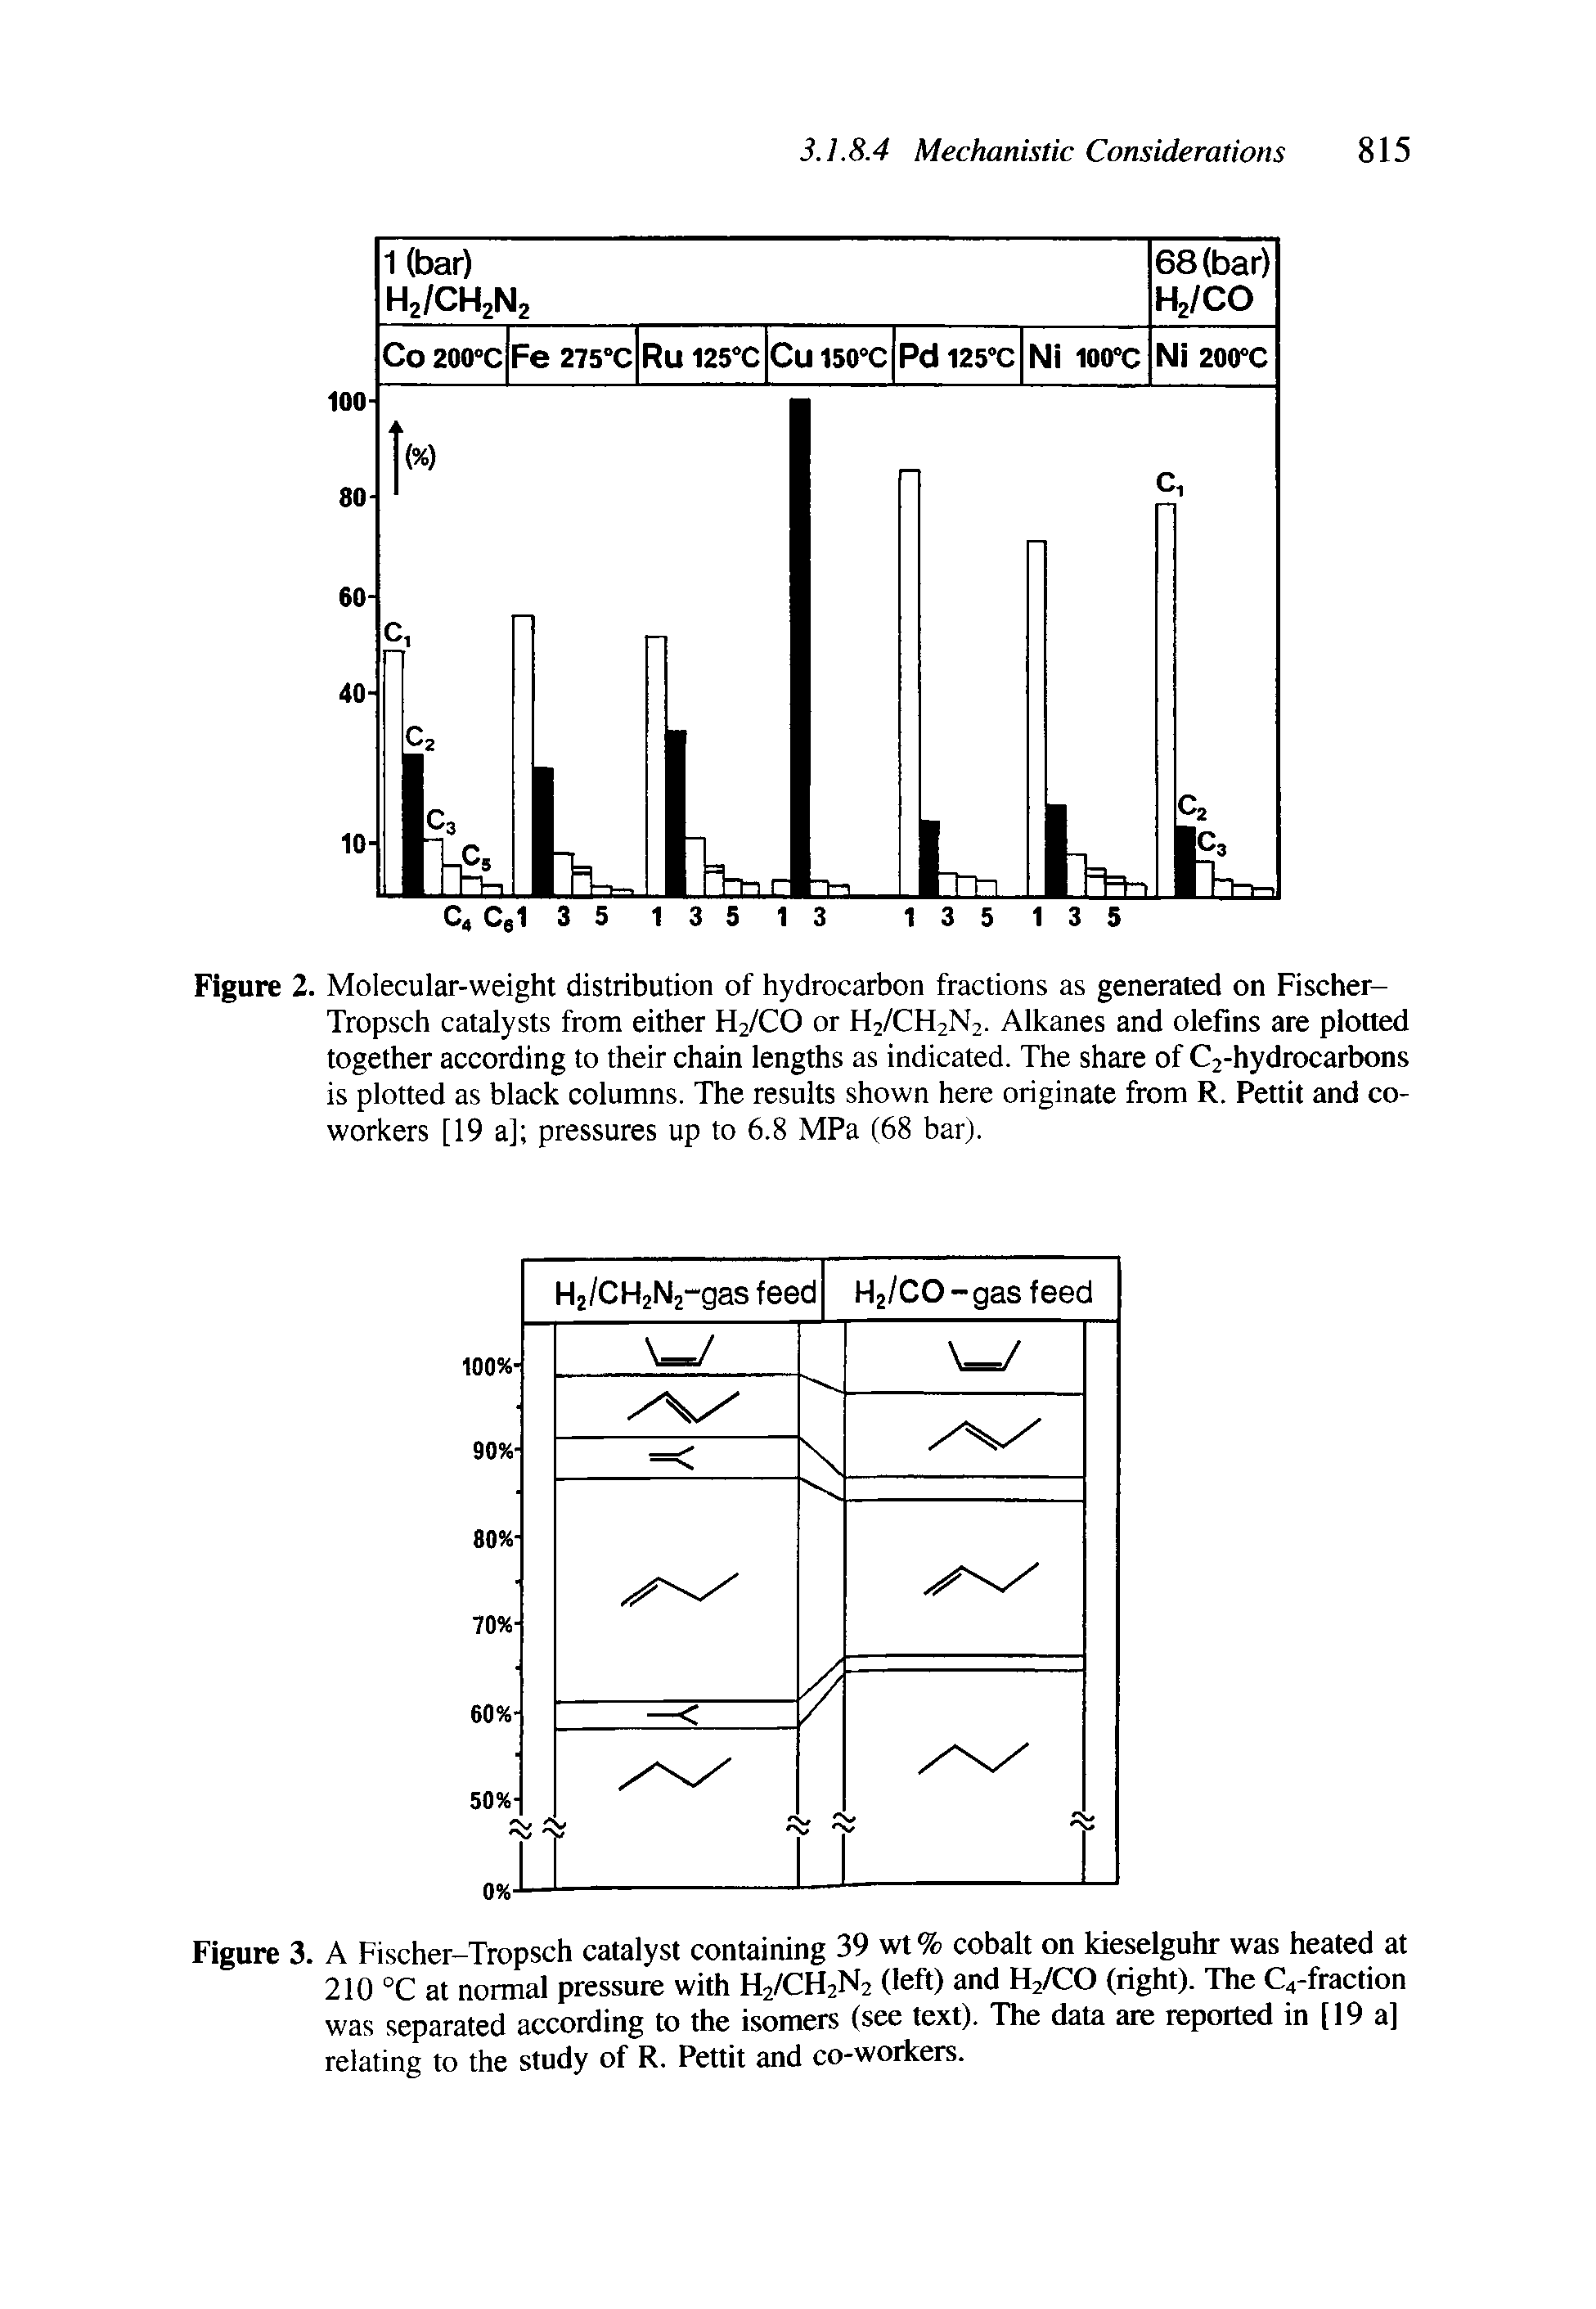 Figure 2. Molecular-weight distribution of hydrocarbon fractions as generated on Fischer-Tropsch catalysts from either H2/CO or H2/CH2N2. Alkanes and olefins are plotted together according to their chain lengths as indicated. The share of C2-hydrocarbons is plotted as black columns. The results shown here originate from R. Pettit and coworkers [19 a] pressures up to 6.8 MPa (68 bar).